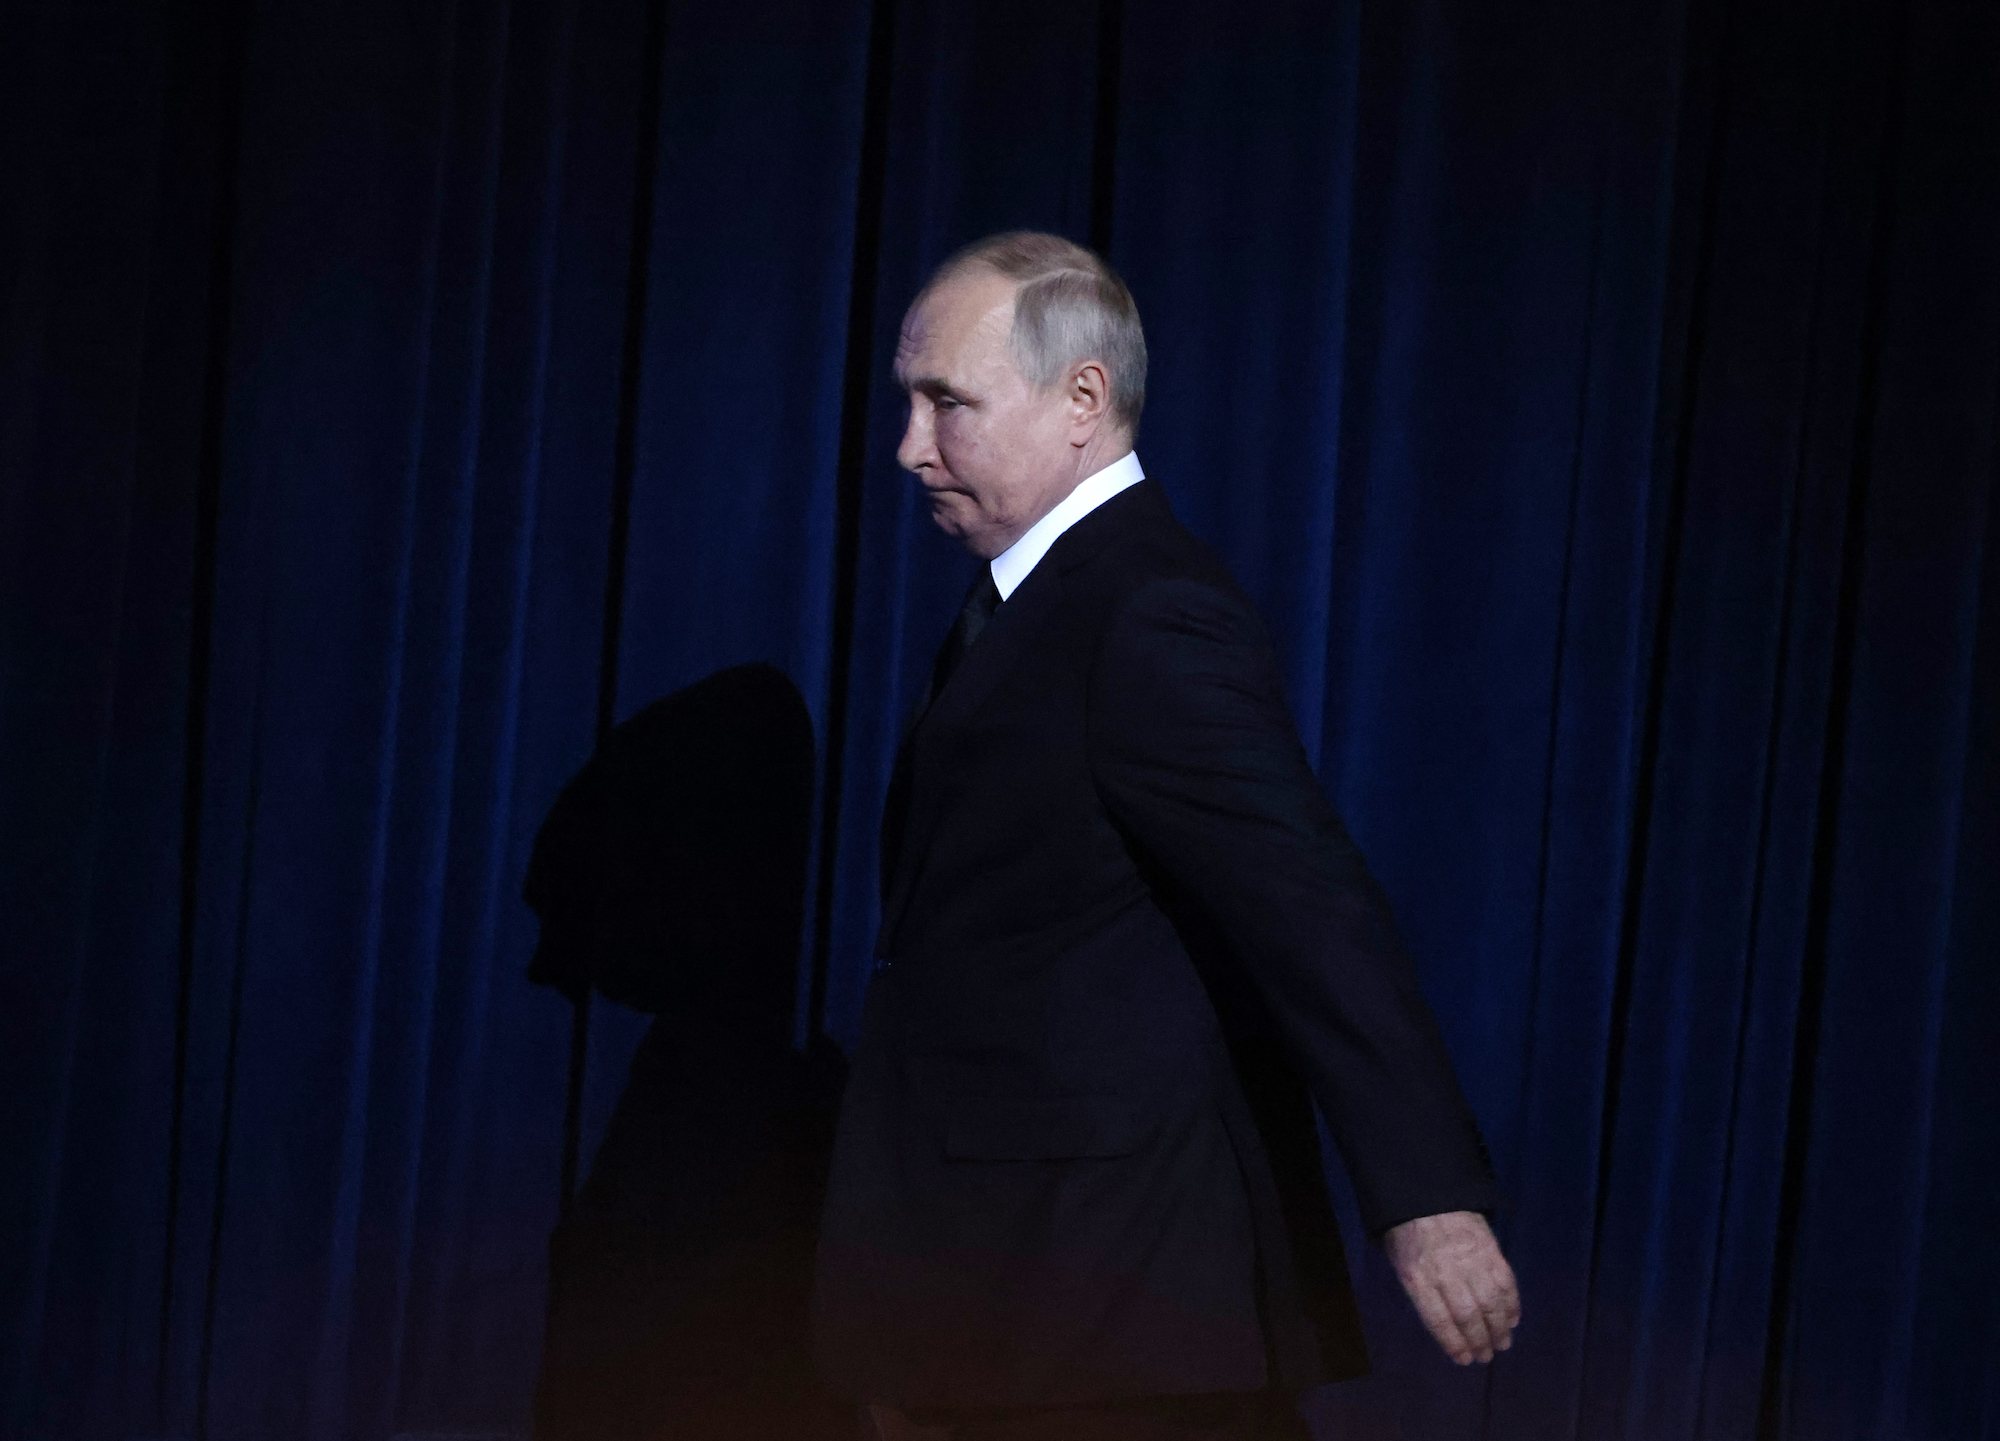 Russian President Vladimir Putin attends an event at the Kremlin, on February 9 in Moscow.